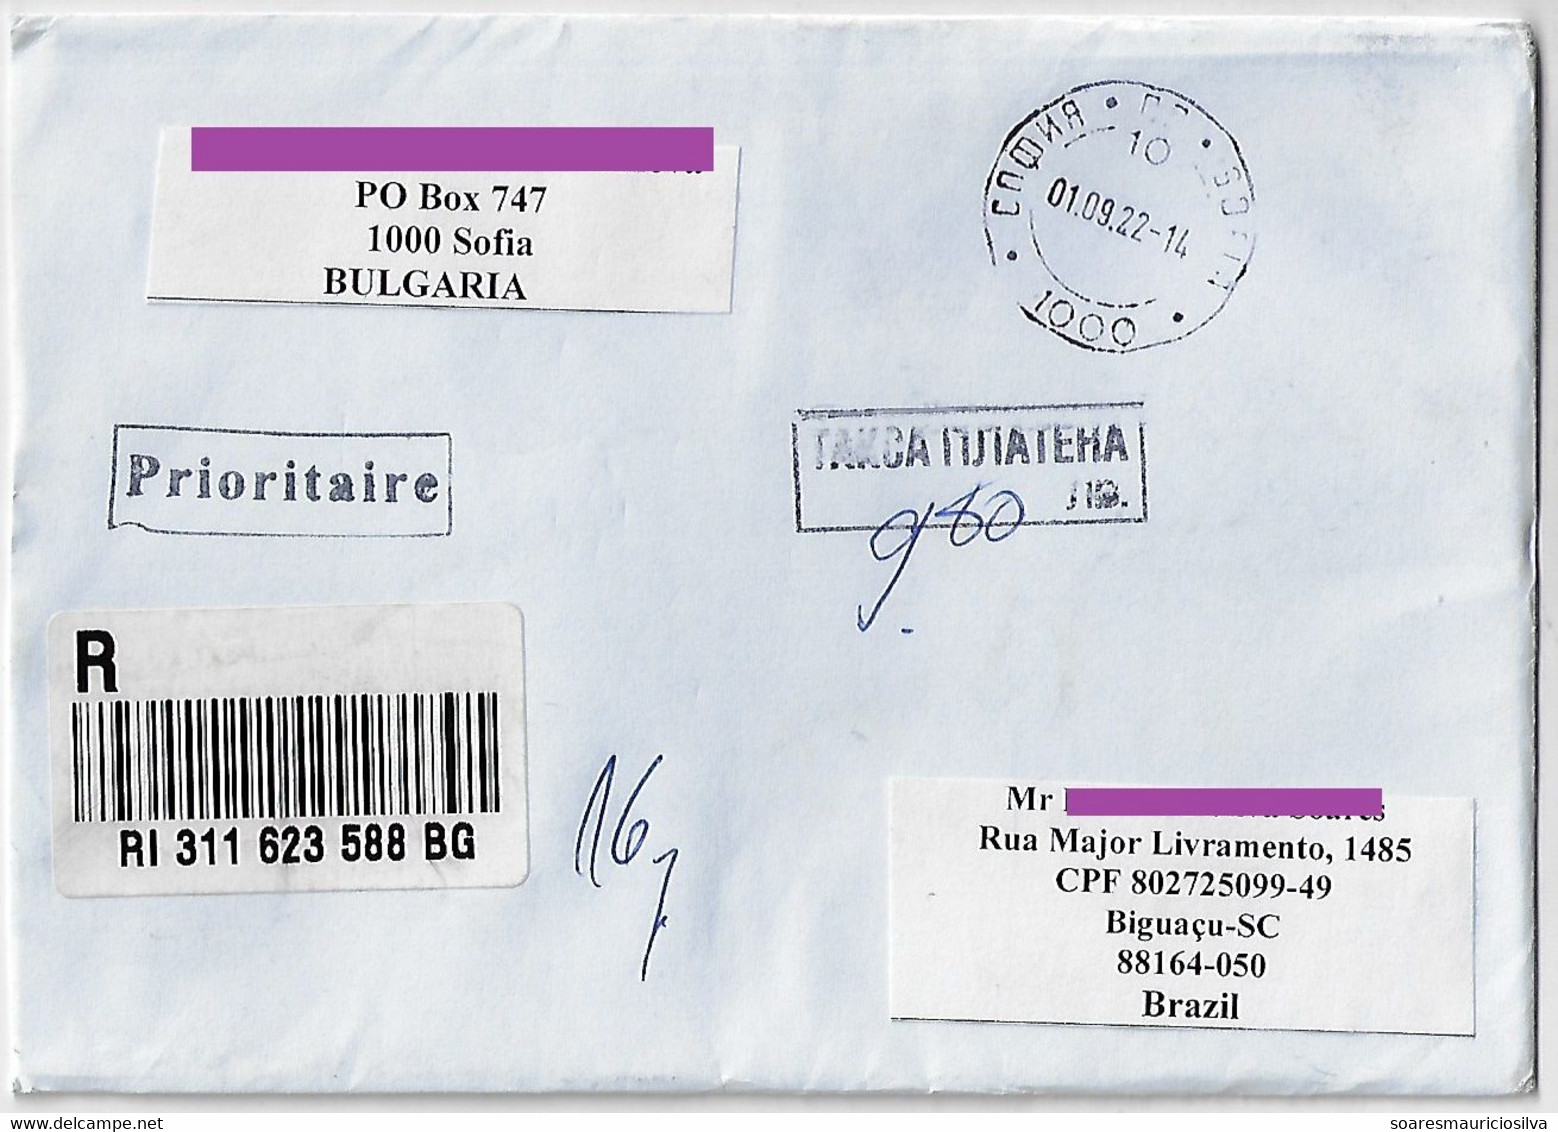 Bulgaria 2022 Barcode Label Registered Priority Cover Sent From Sofia To Biguaçu Brazil Postage Due Cancel 9,80 Lev - Postage Due